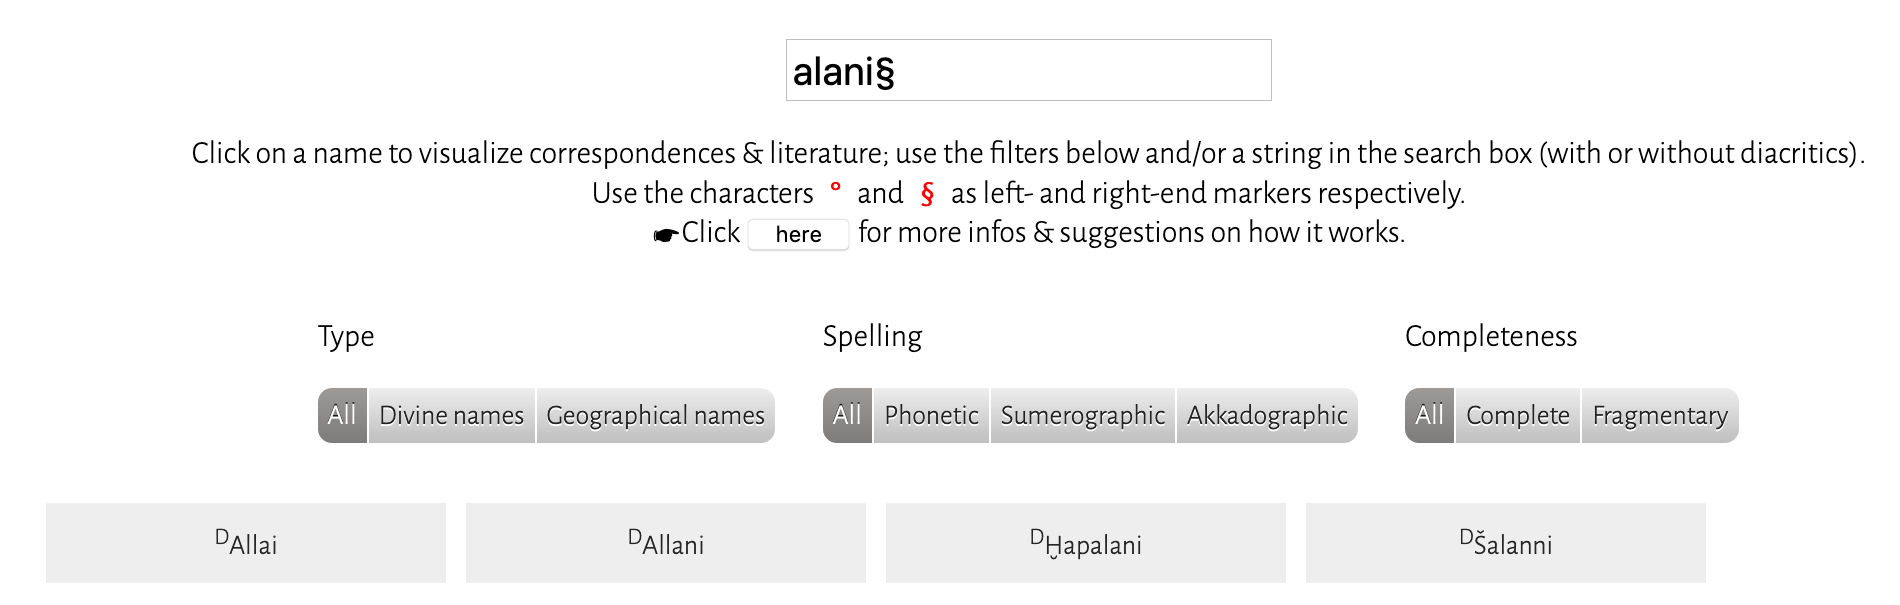 searching after alani§